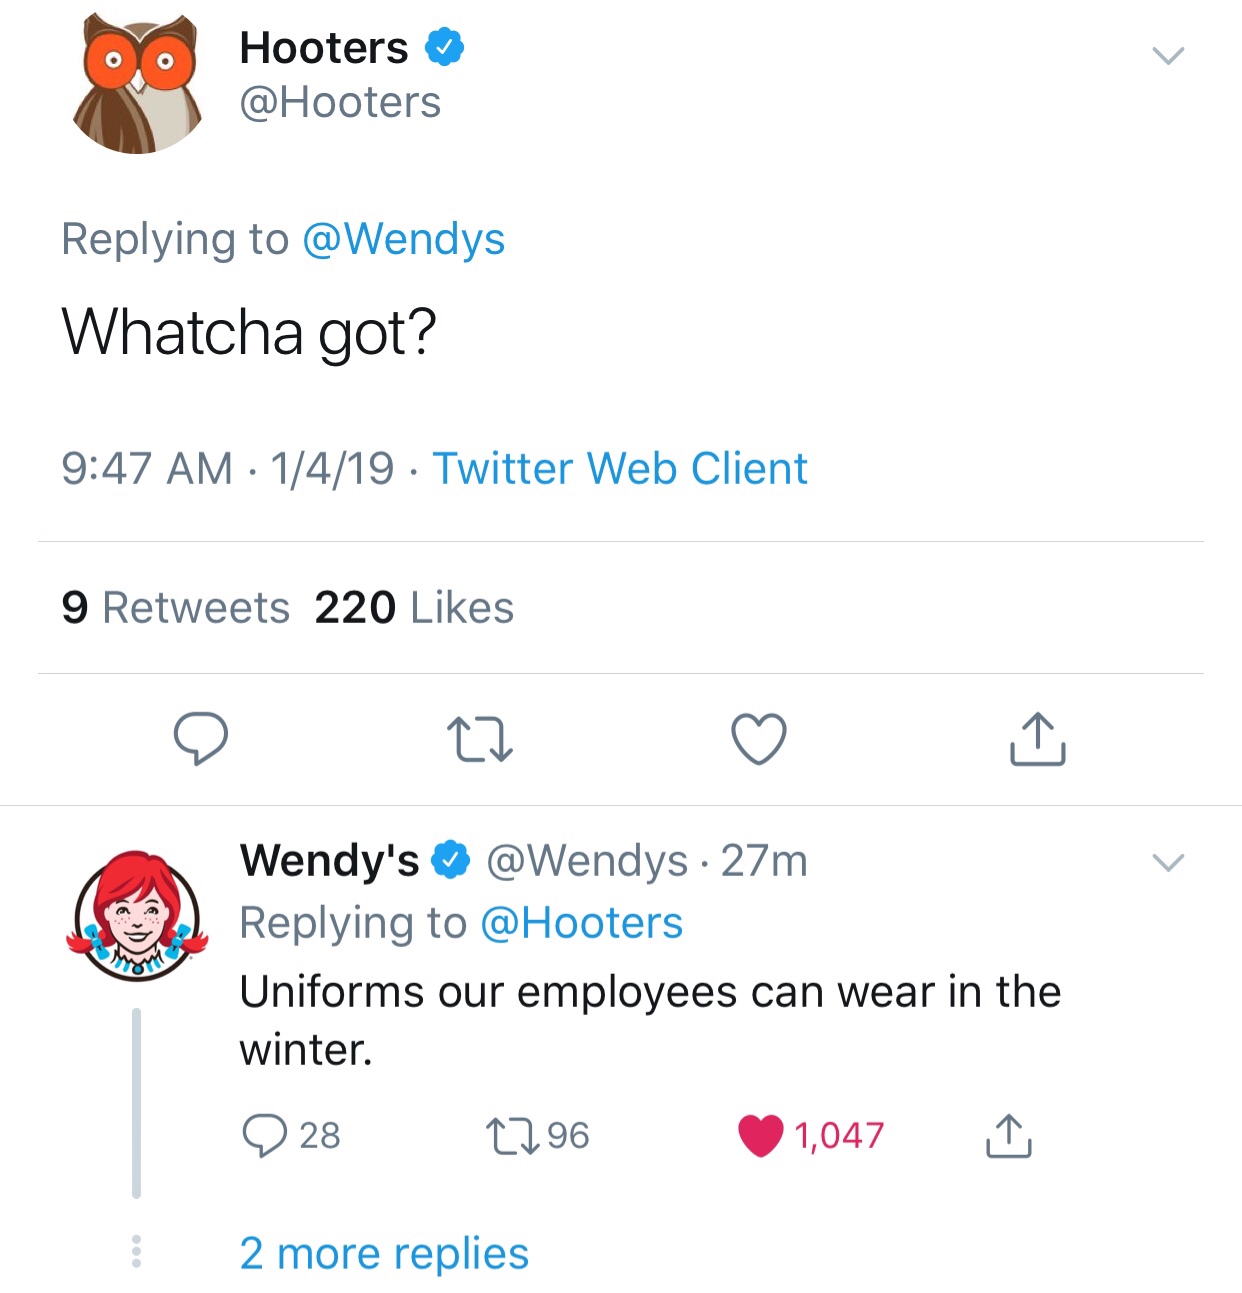 tweet - wendy's company - Hooters Whatcha got? 1419 Twitter Web Client 9 220 @ L2 Wendy's ~ 27m Uniforms our employees can wear in the winter. 228 2296 1,047 2 more replies